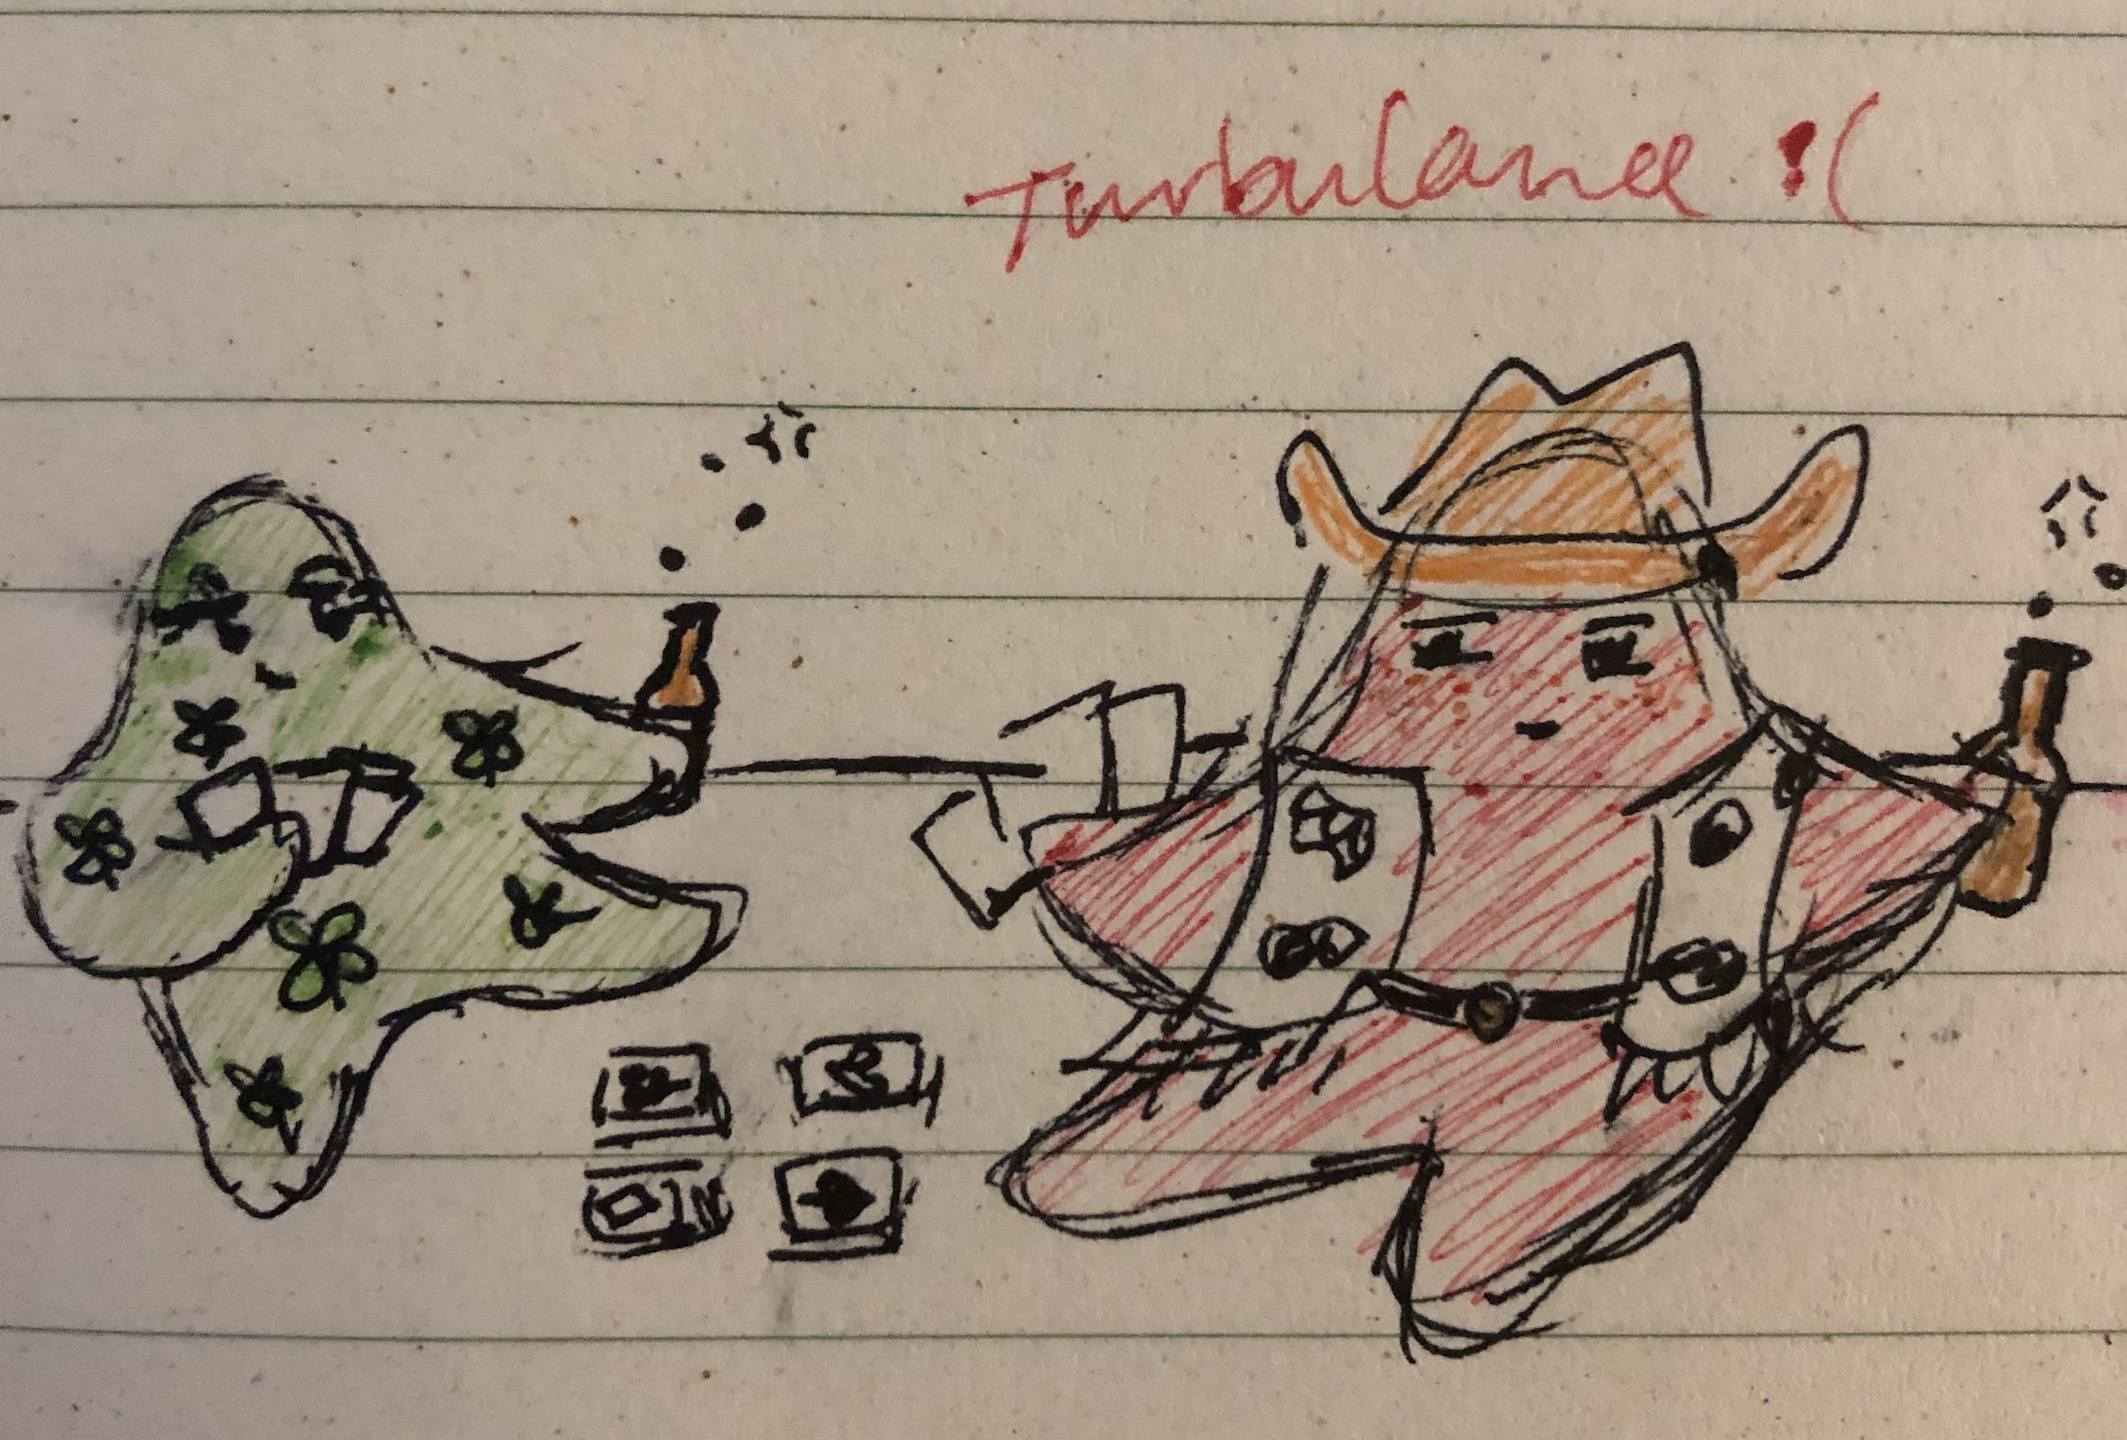 Lucky star and lone star holding brown bubbling bottles and playing cards. Lucky star looks smug and lone star is squinting at him. Labeled with the word Turbulence to explain why the drawing is shaky